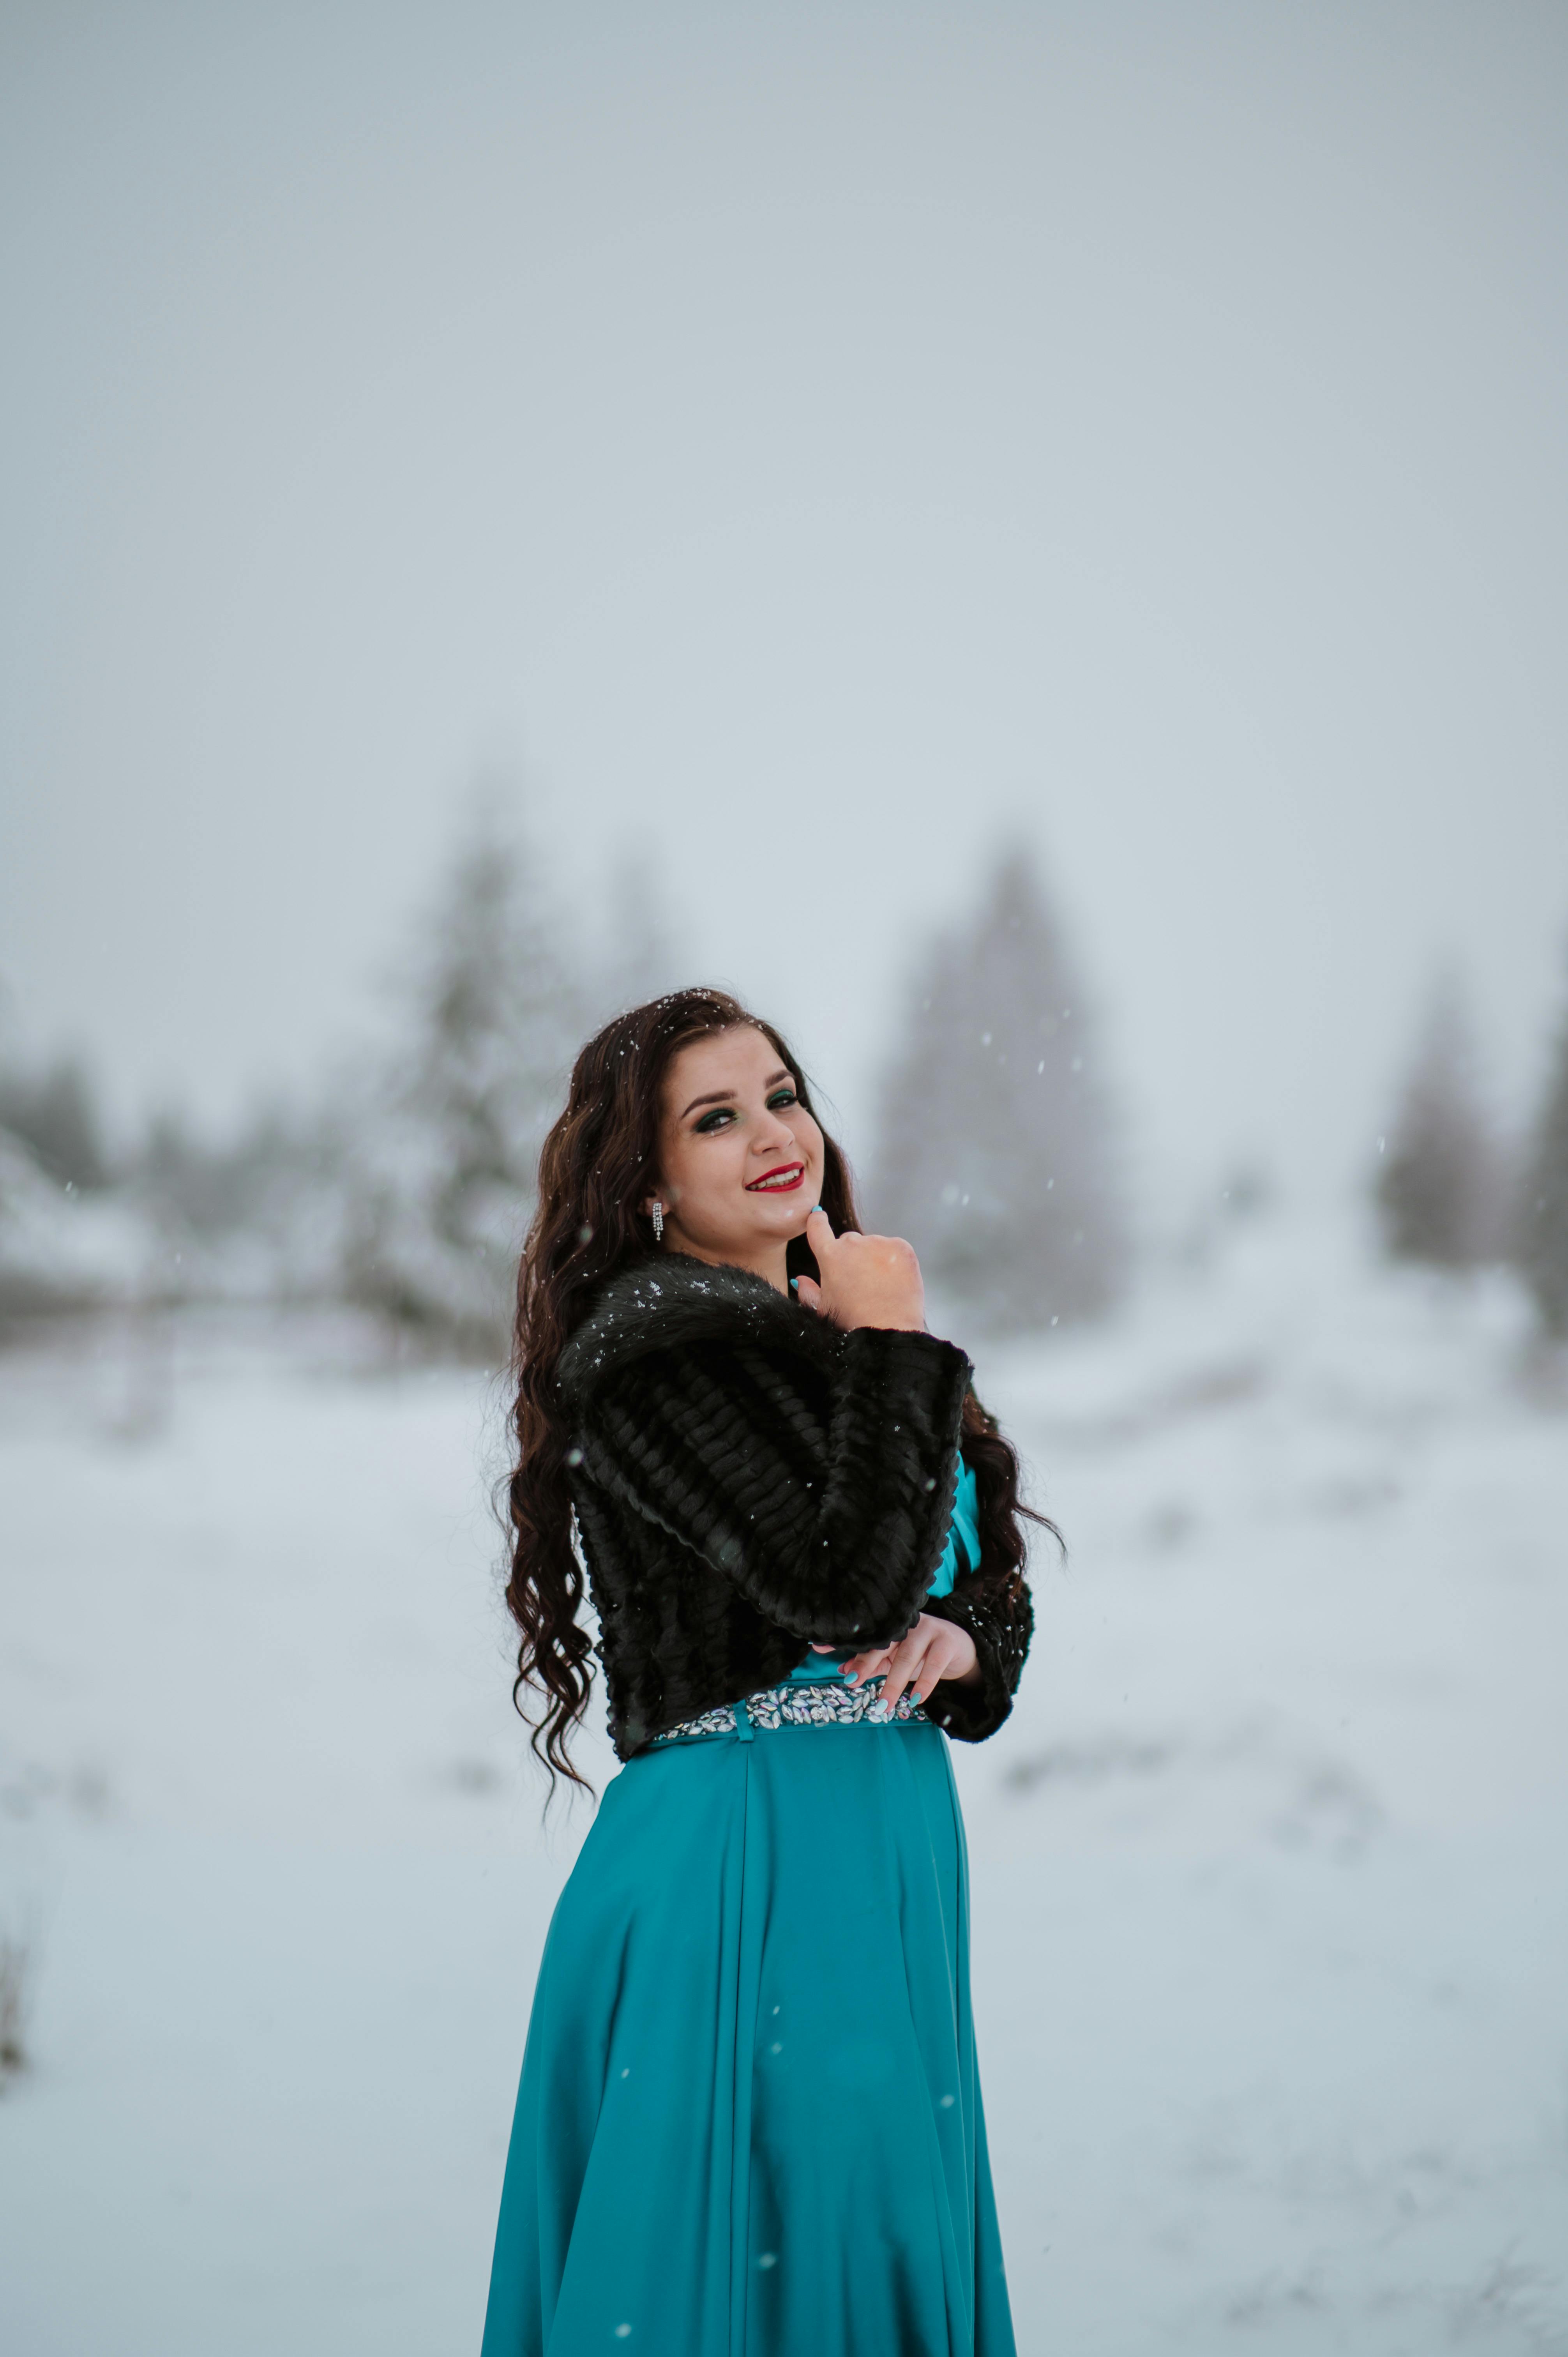 Premium Photo | Winter clothes plussize model fashionable poses to  highlight the clothing in a flattering way